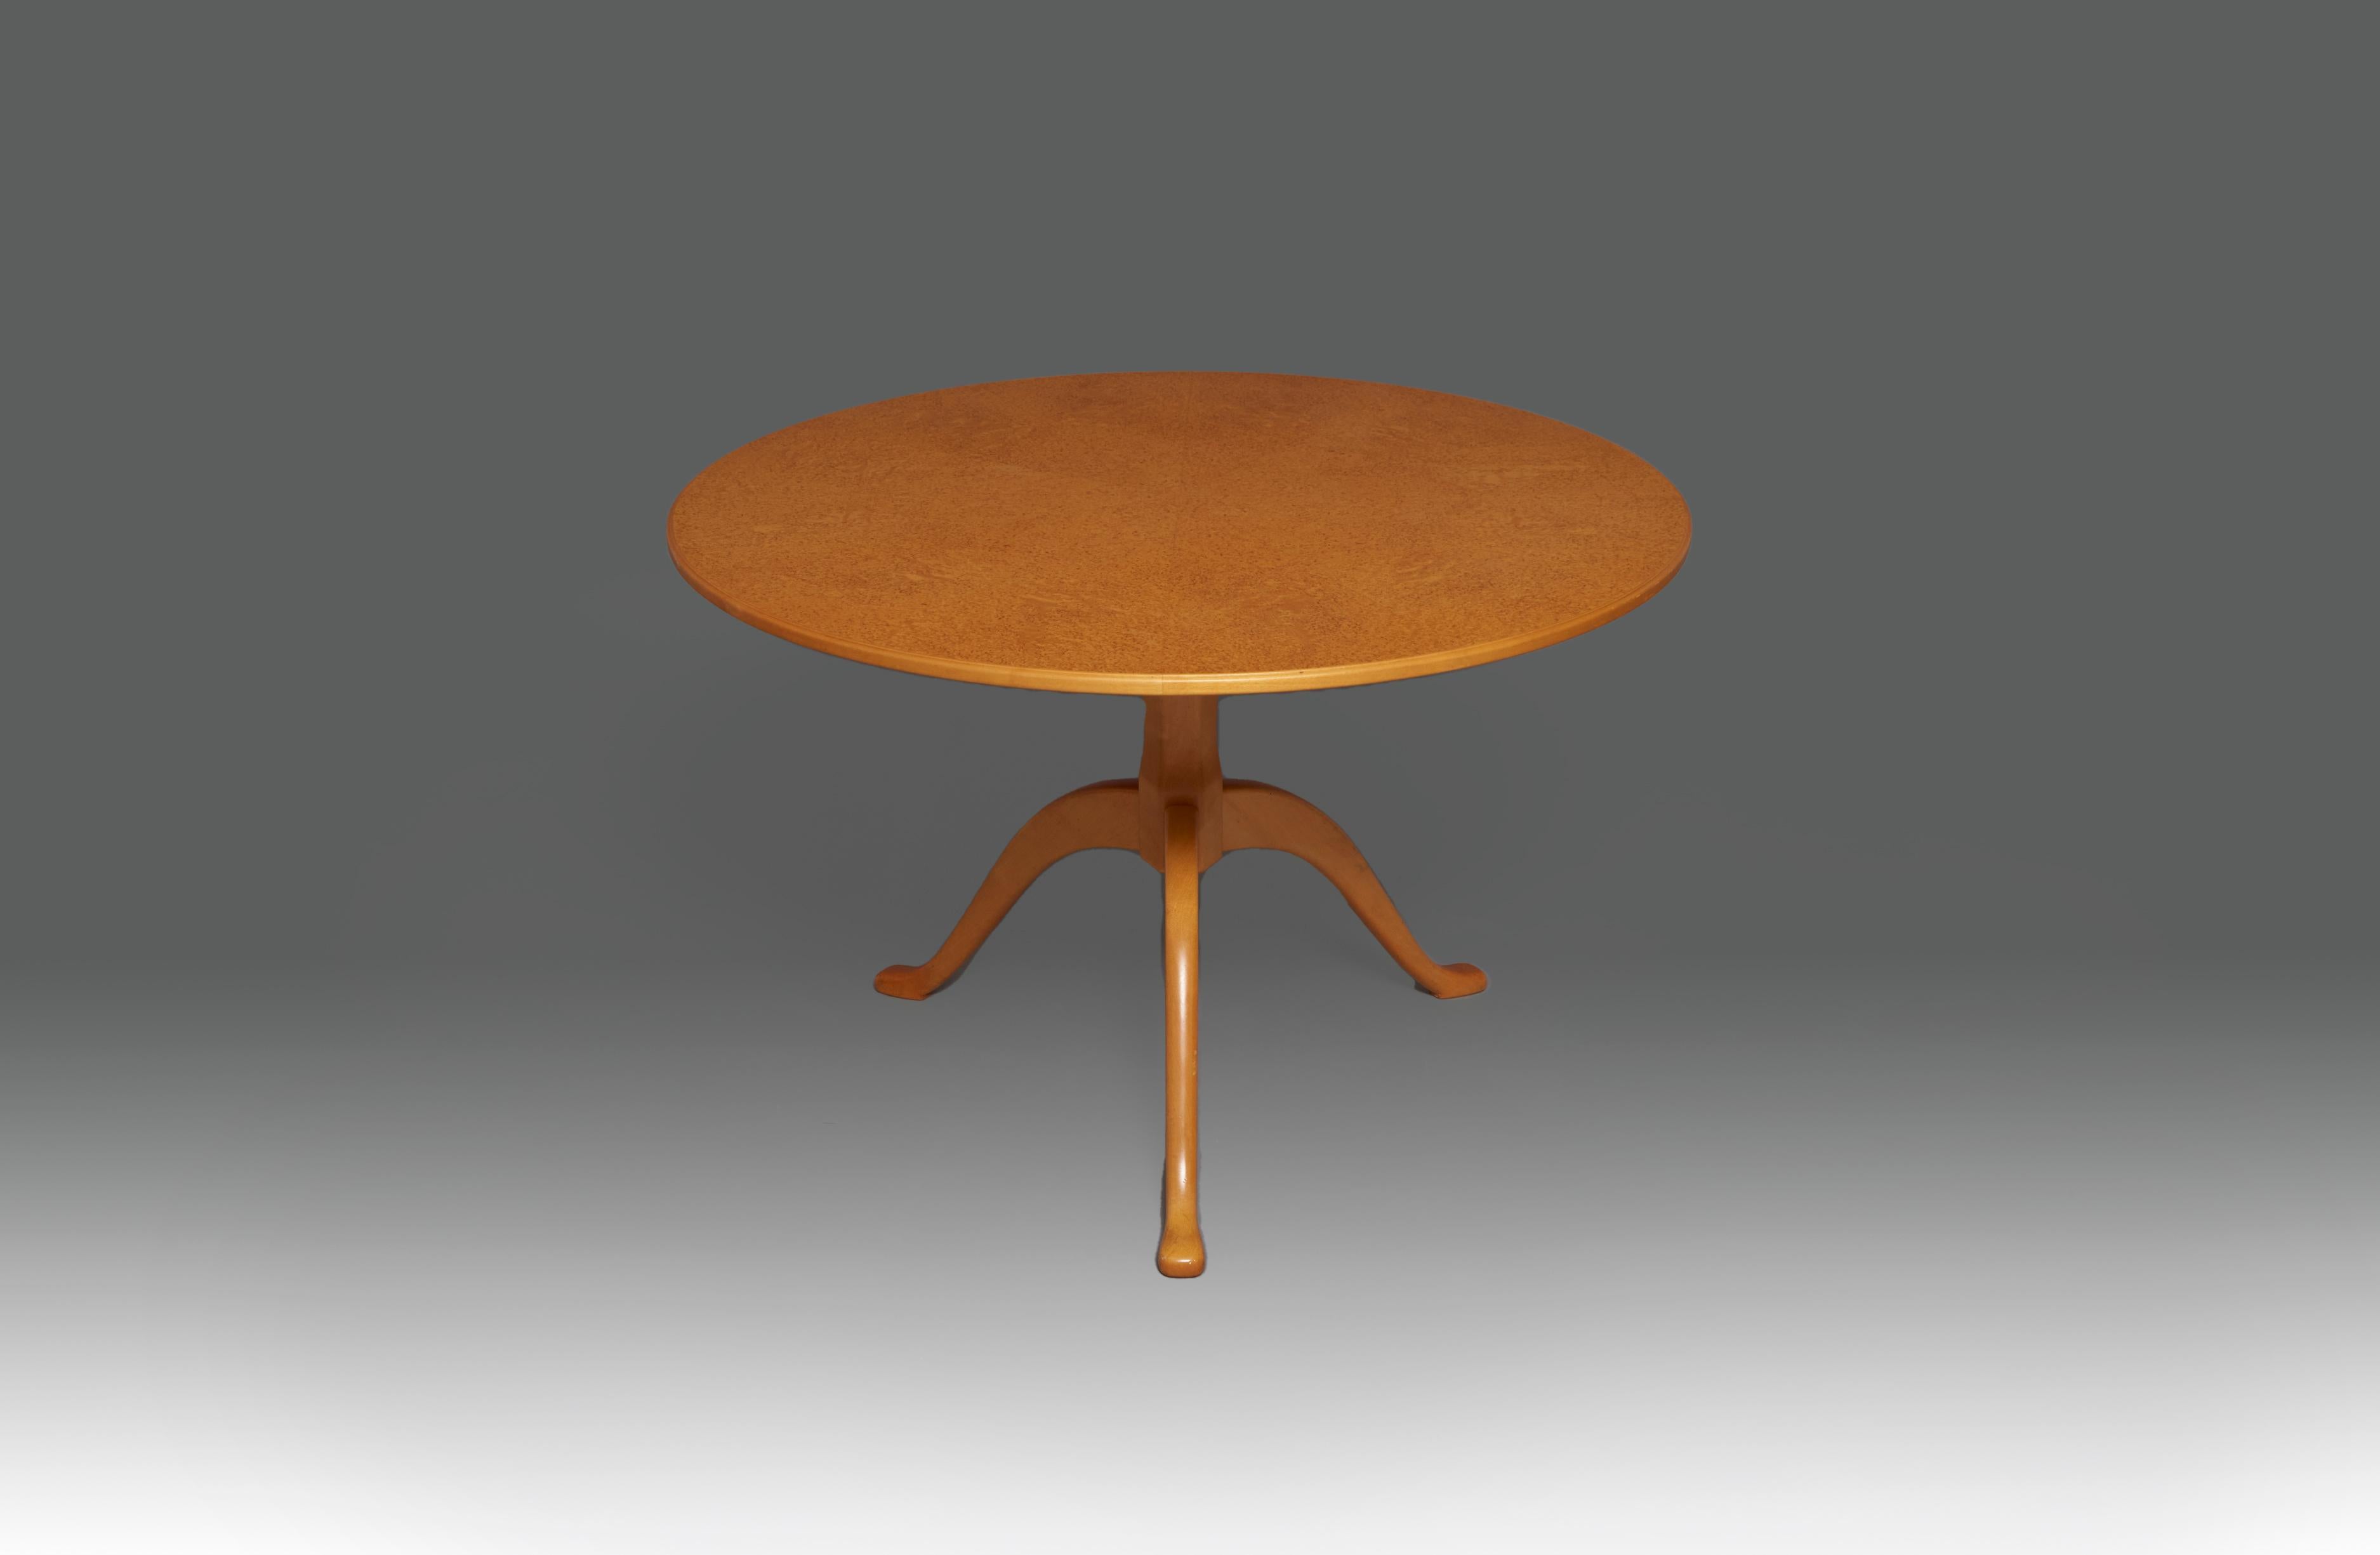 1940´s swedish round center table “Berg” in birch and Masur Birch by Carl Malmsten with a sculpted tripod base and remarkable table top in birch. Fully refinished.